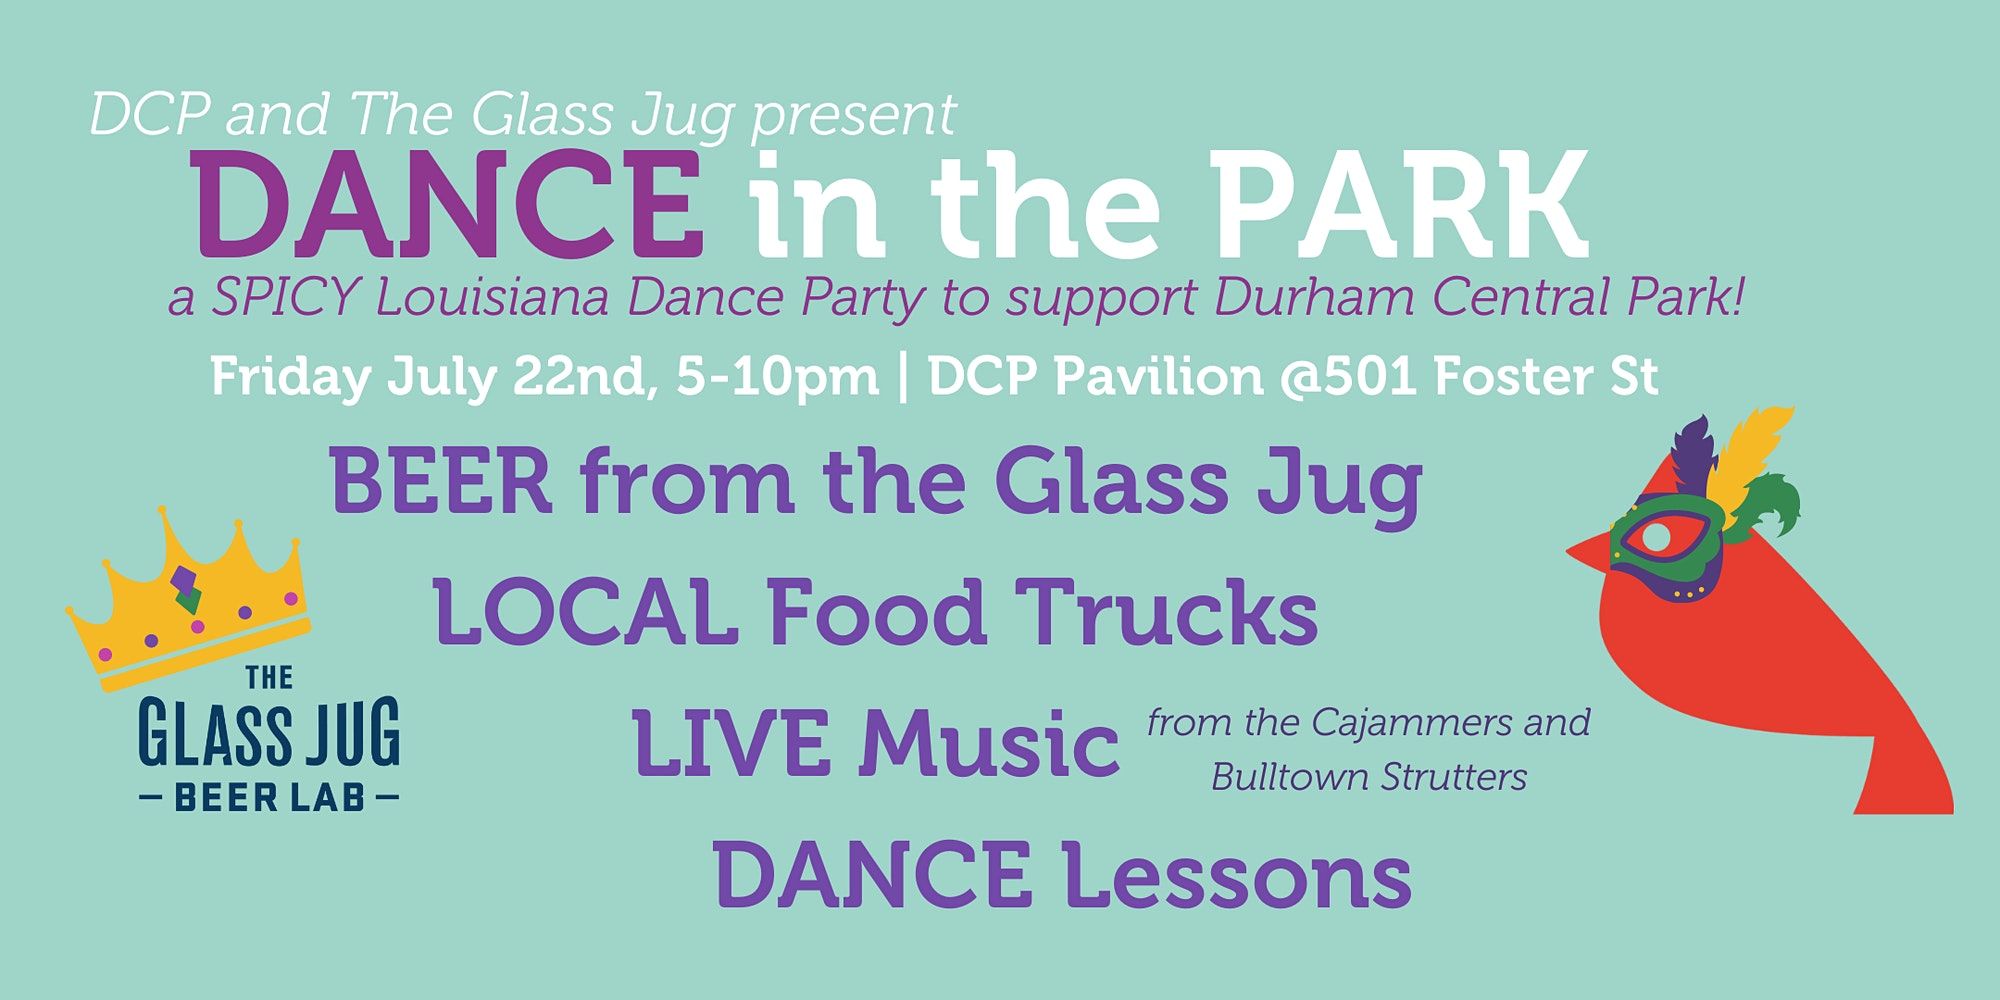 Dance in the Park: Louisiana Dance Party benefiting Durham Central Park promotional image